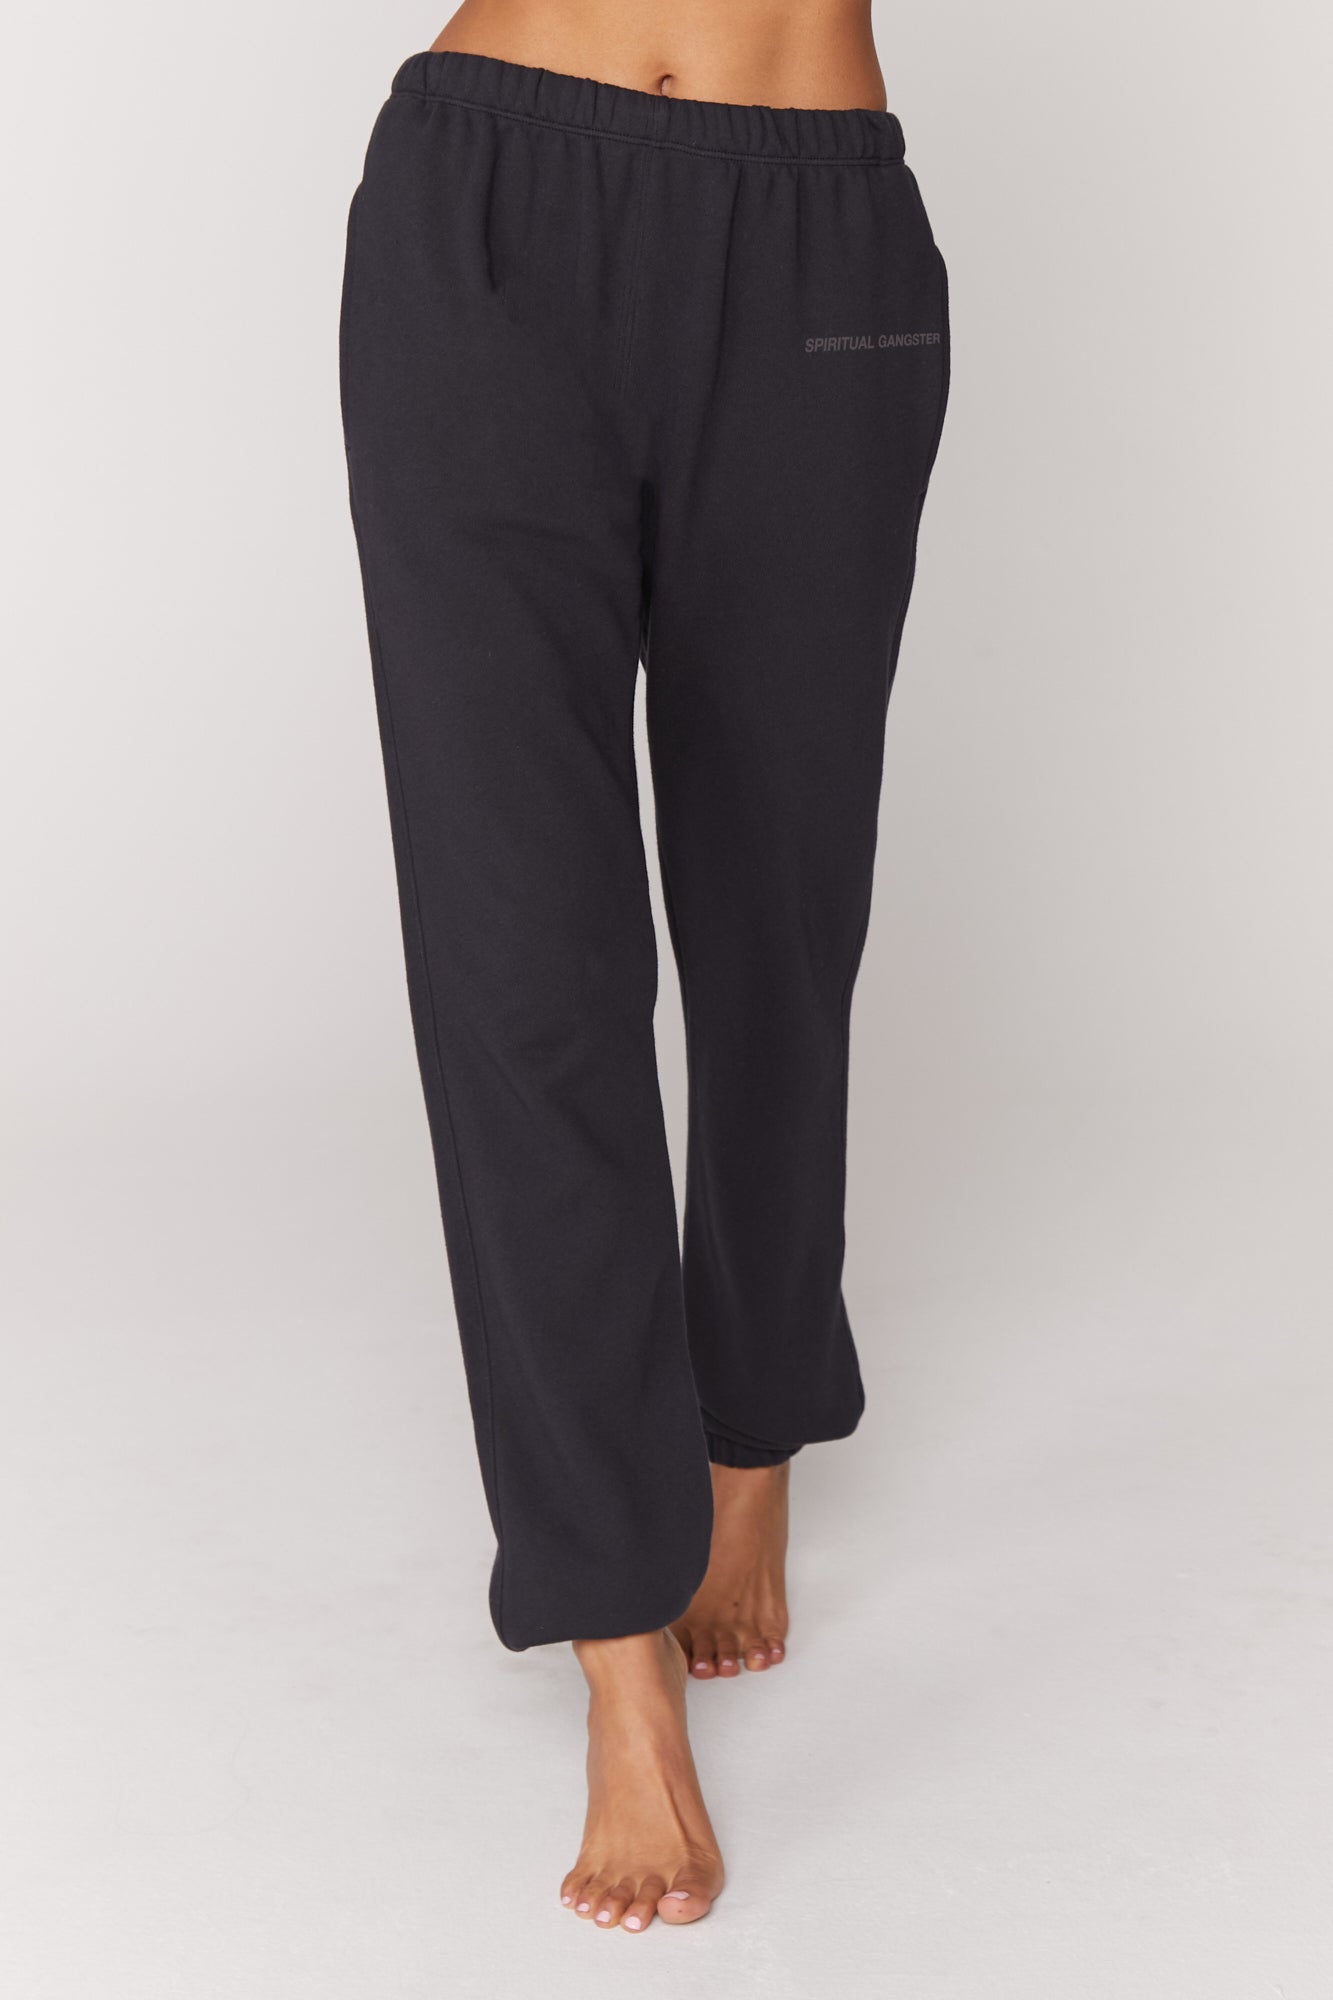 Women's SG Laguna Sweatpant in BlackYou were born to lounge. Full length means full comfort in our super soft and easy to wear SG Laguna Sweatpant. Made with 100% cotton, a slouchy and relaxed oversized fit for maximum comfort, elastic waistline and ankles, and "Spiritual Gangster" front logo. Perfect to throw on after a sweat session or for casual days. 